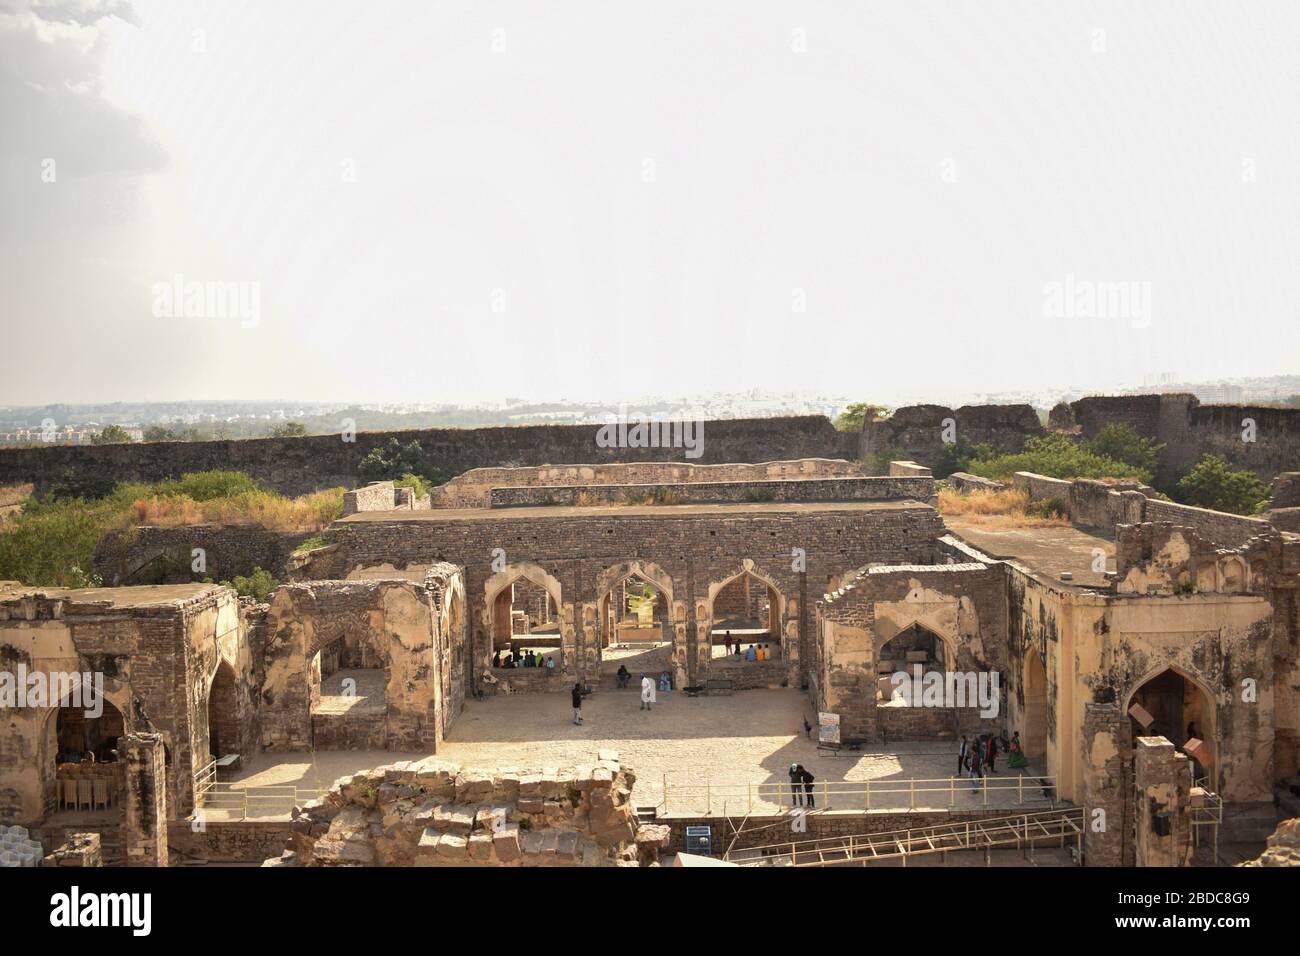 Ancient Old Historical Golconda Fort in India Background stock photograph. Stock Photo